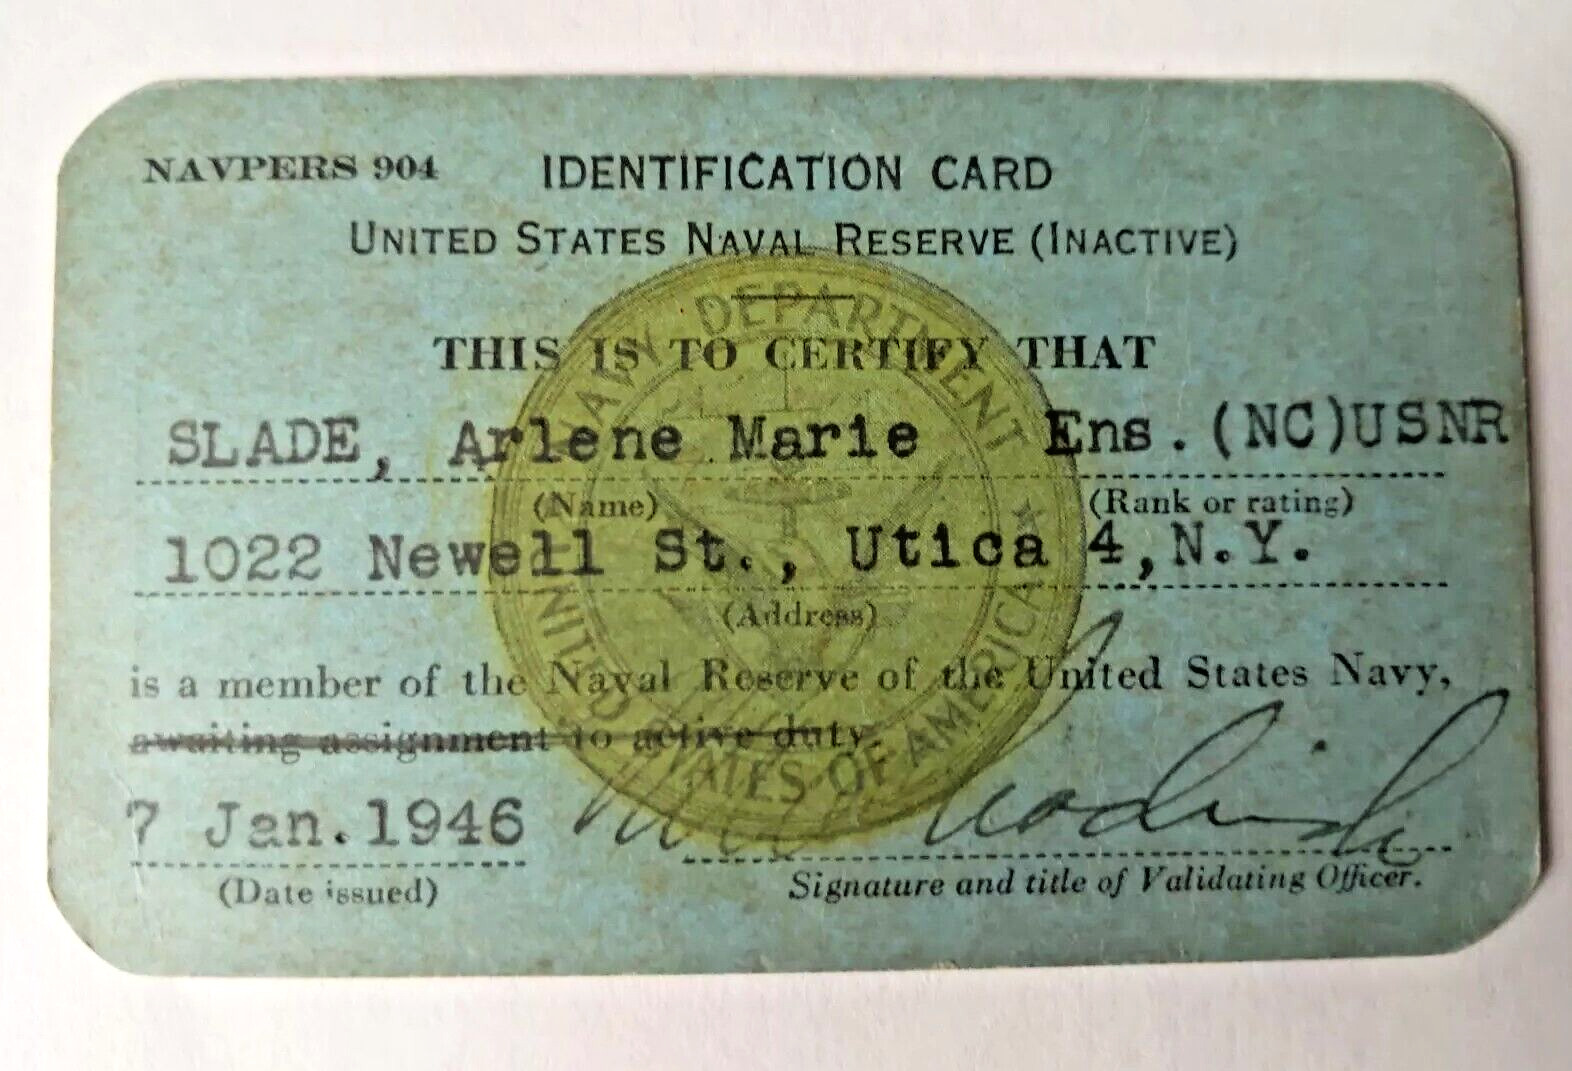 United States Navel Reserve (Inactive) Identification Card Dated: 7 Jan. 1946